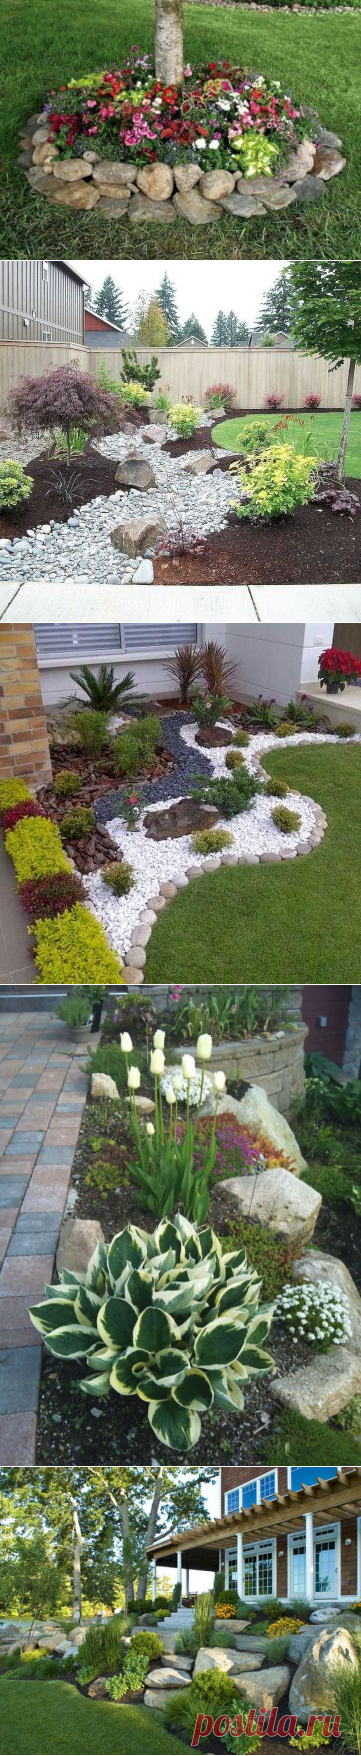 75 Stunning Front Yard Rock Garden Landscaping Ideas - wholiving